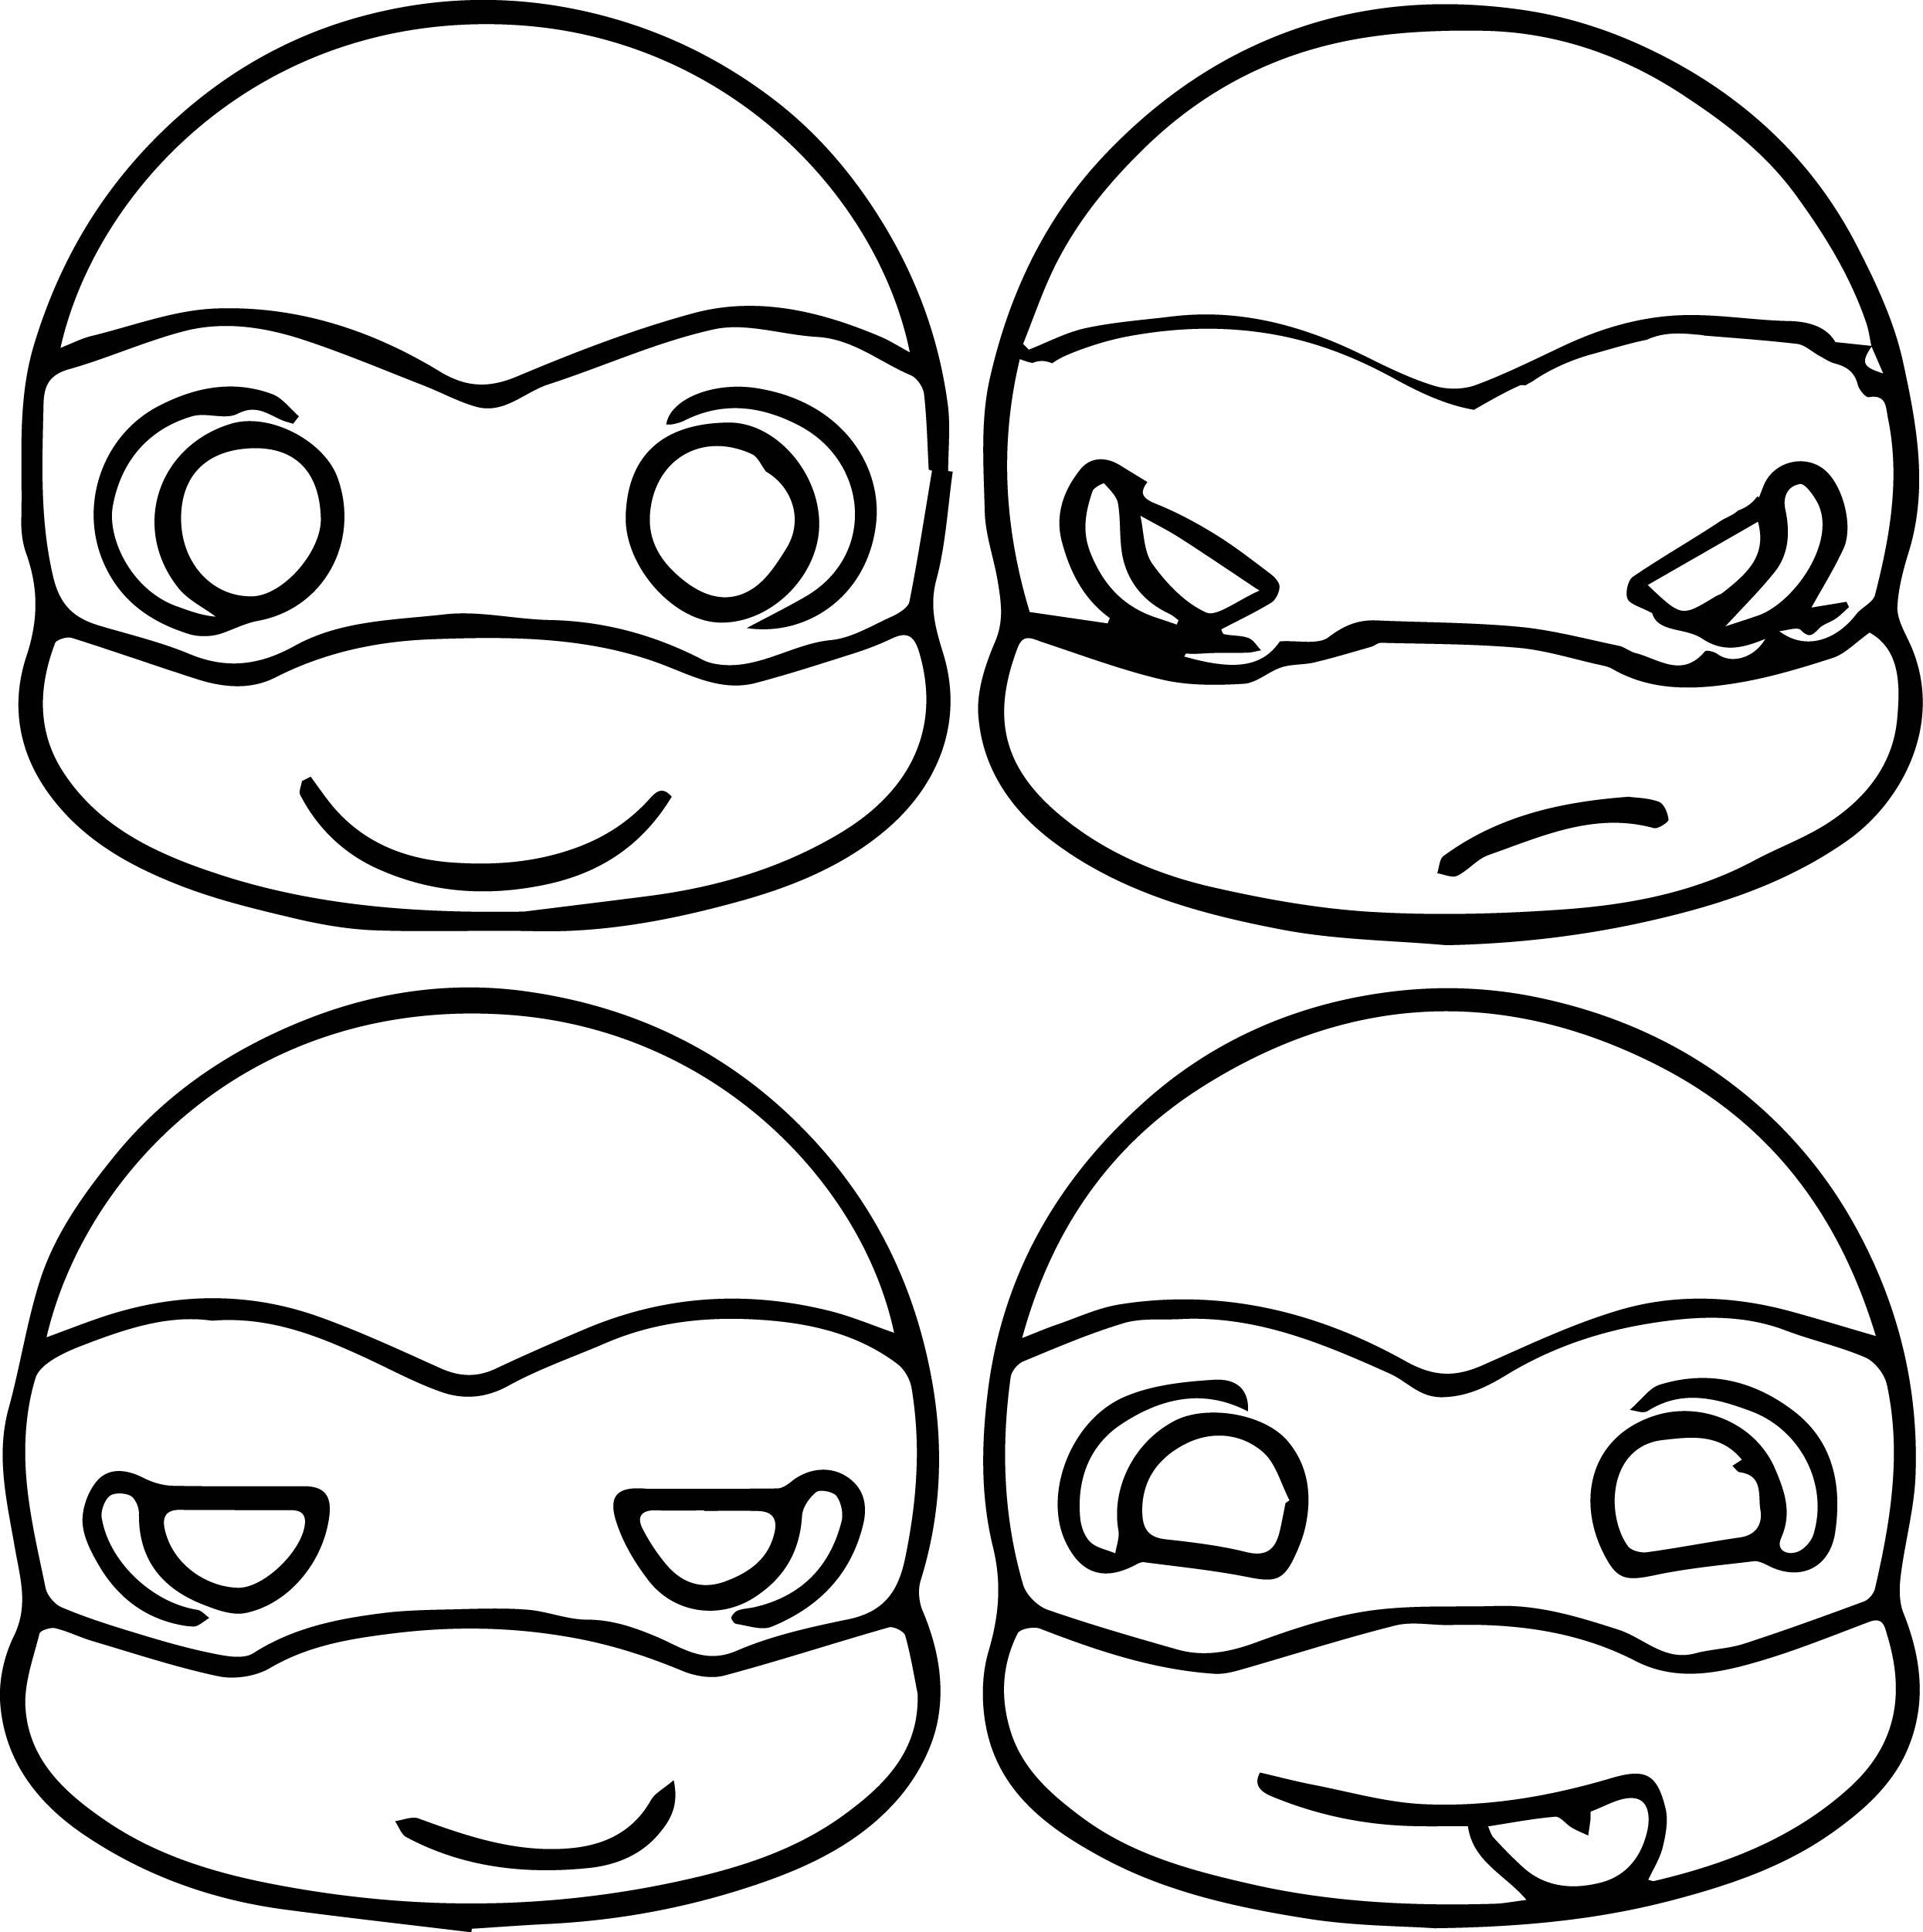 Ninja Turtle Mask Coloring Page Coloring Ideas Coloring Ideas Cooloring Book Ninja Turtle Sheets